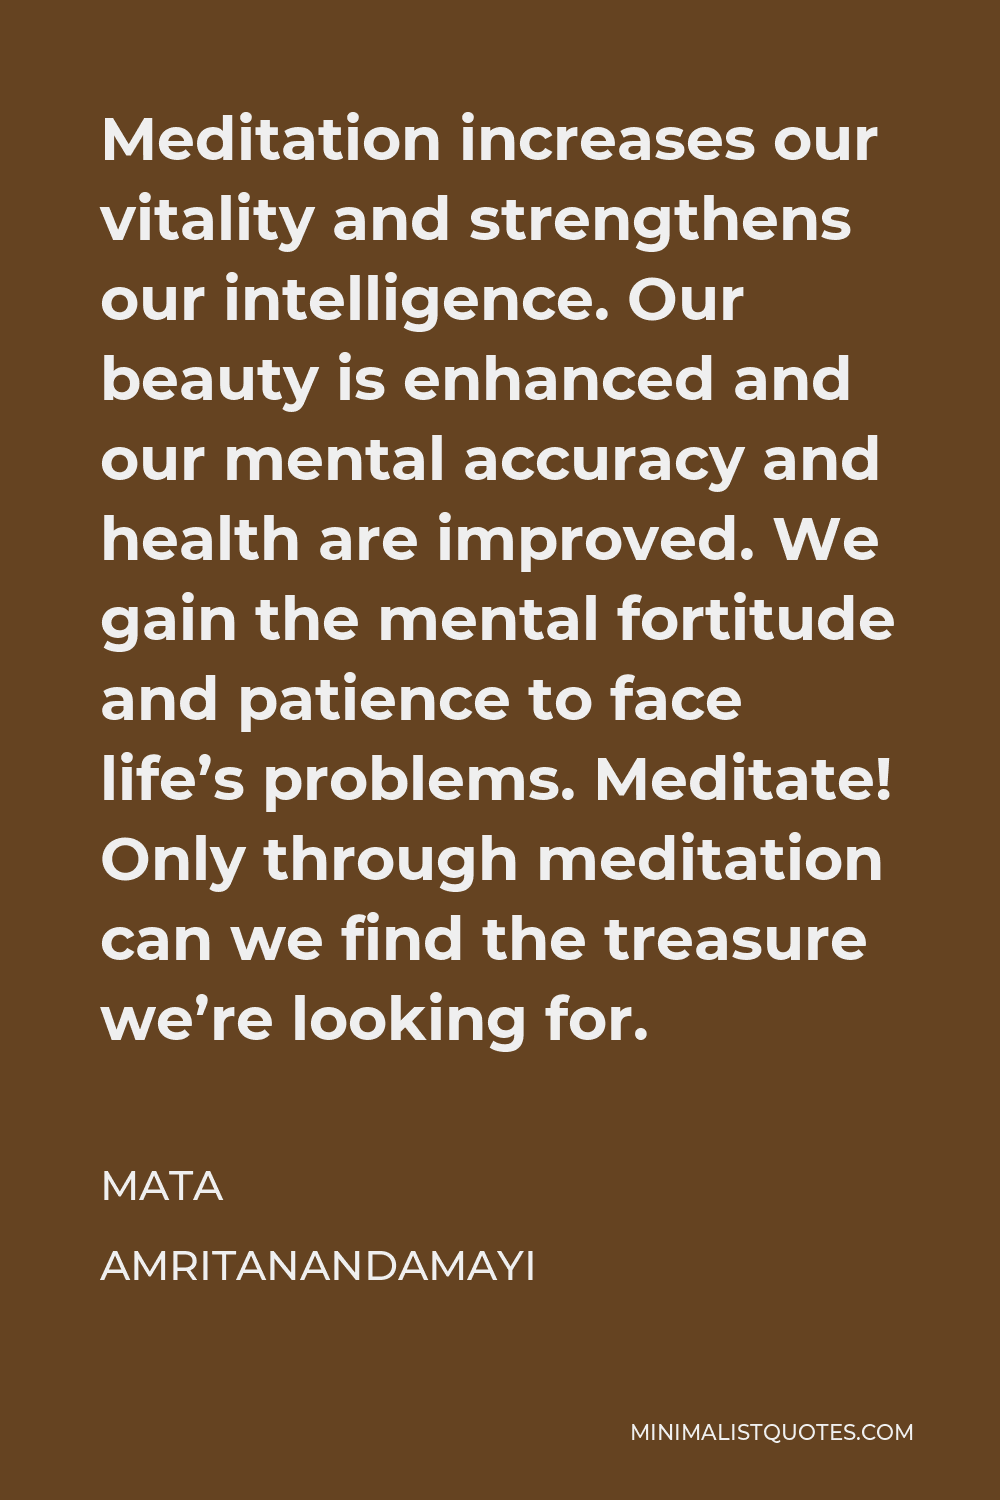 Mata Amritanandamayi Quote - Meditation increases our vitality and strengthens our intelligence. Our beauty is enhanced and our mental accuracy and health are improved. We gain the mental fortitude and patience to face life’s problems. Meditate! Only through meditation can we find the treasure we’re looking for.